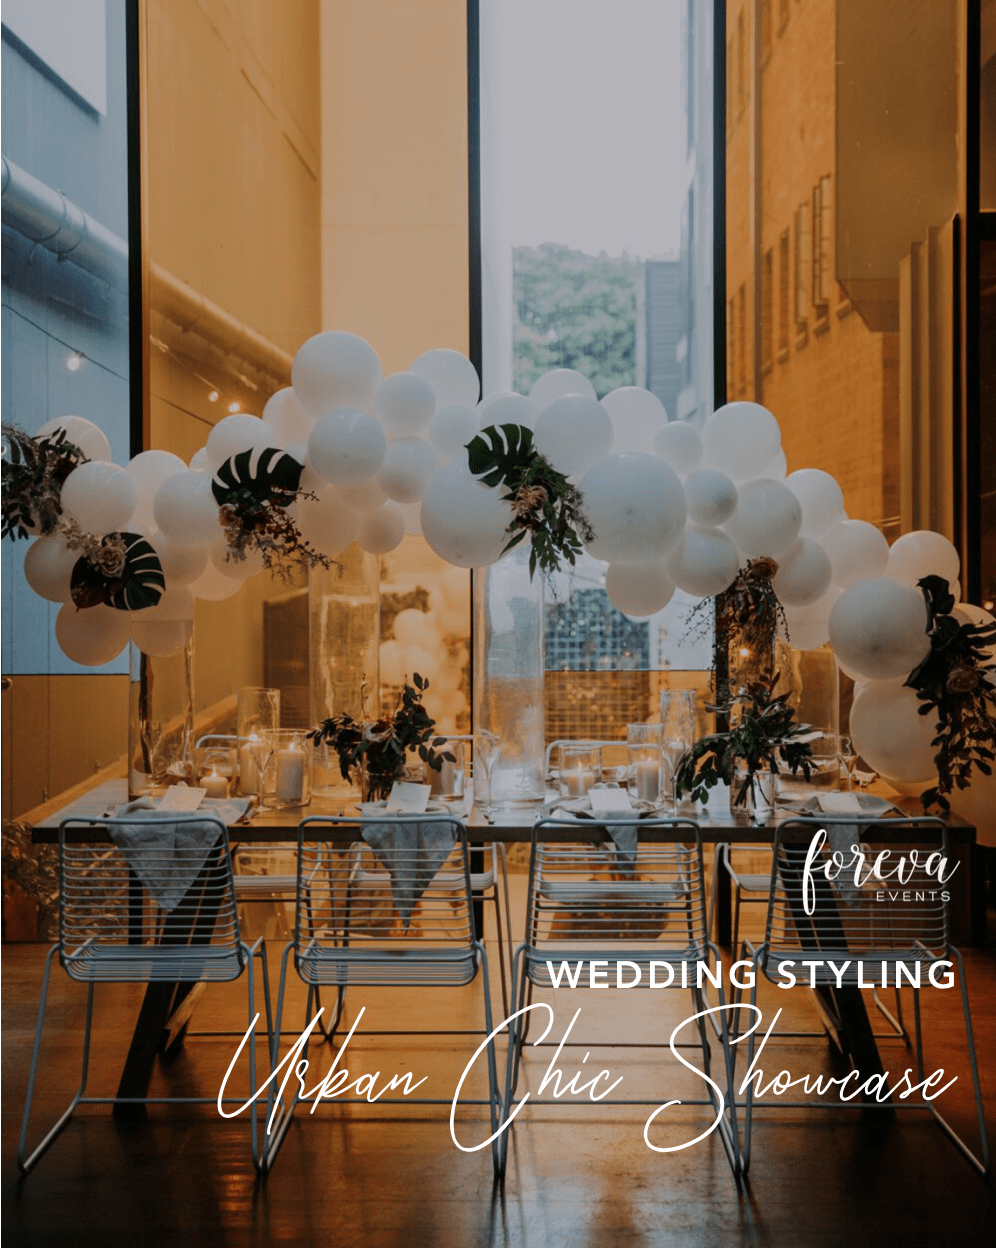 INDUSTRIAL URBAN CHIC SHOWCASE | Foreva Events